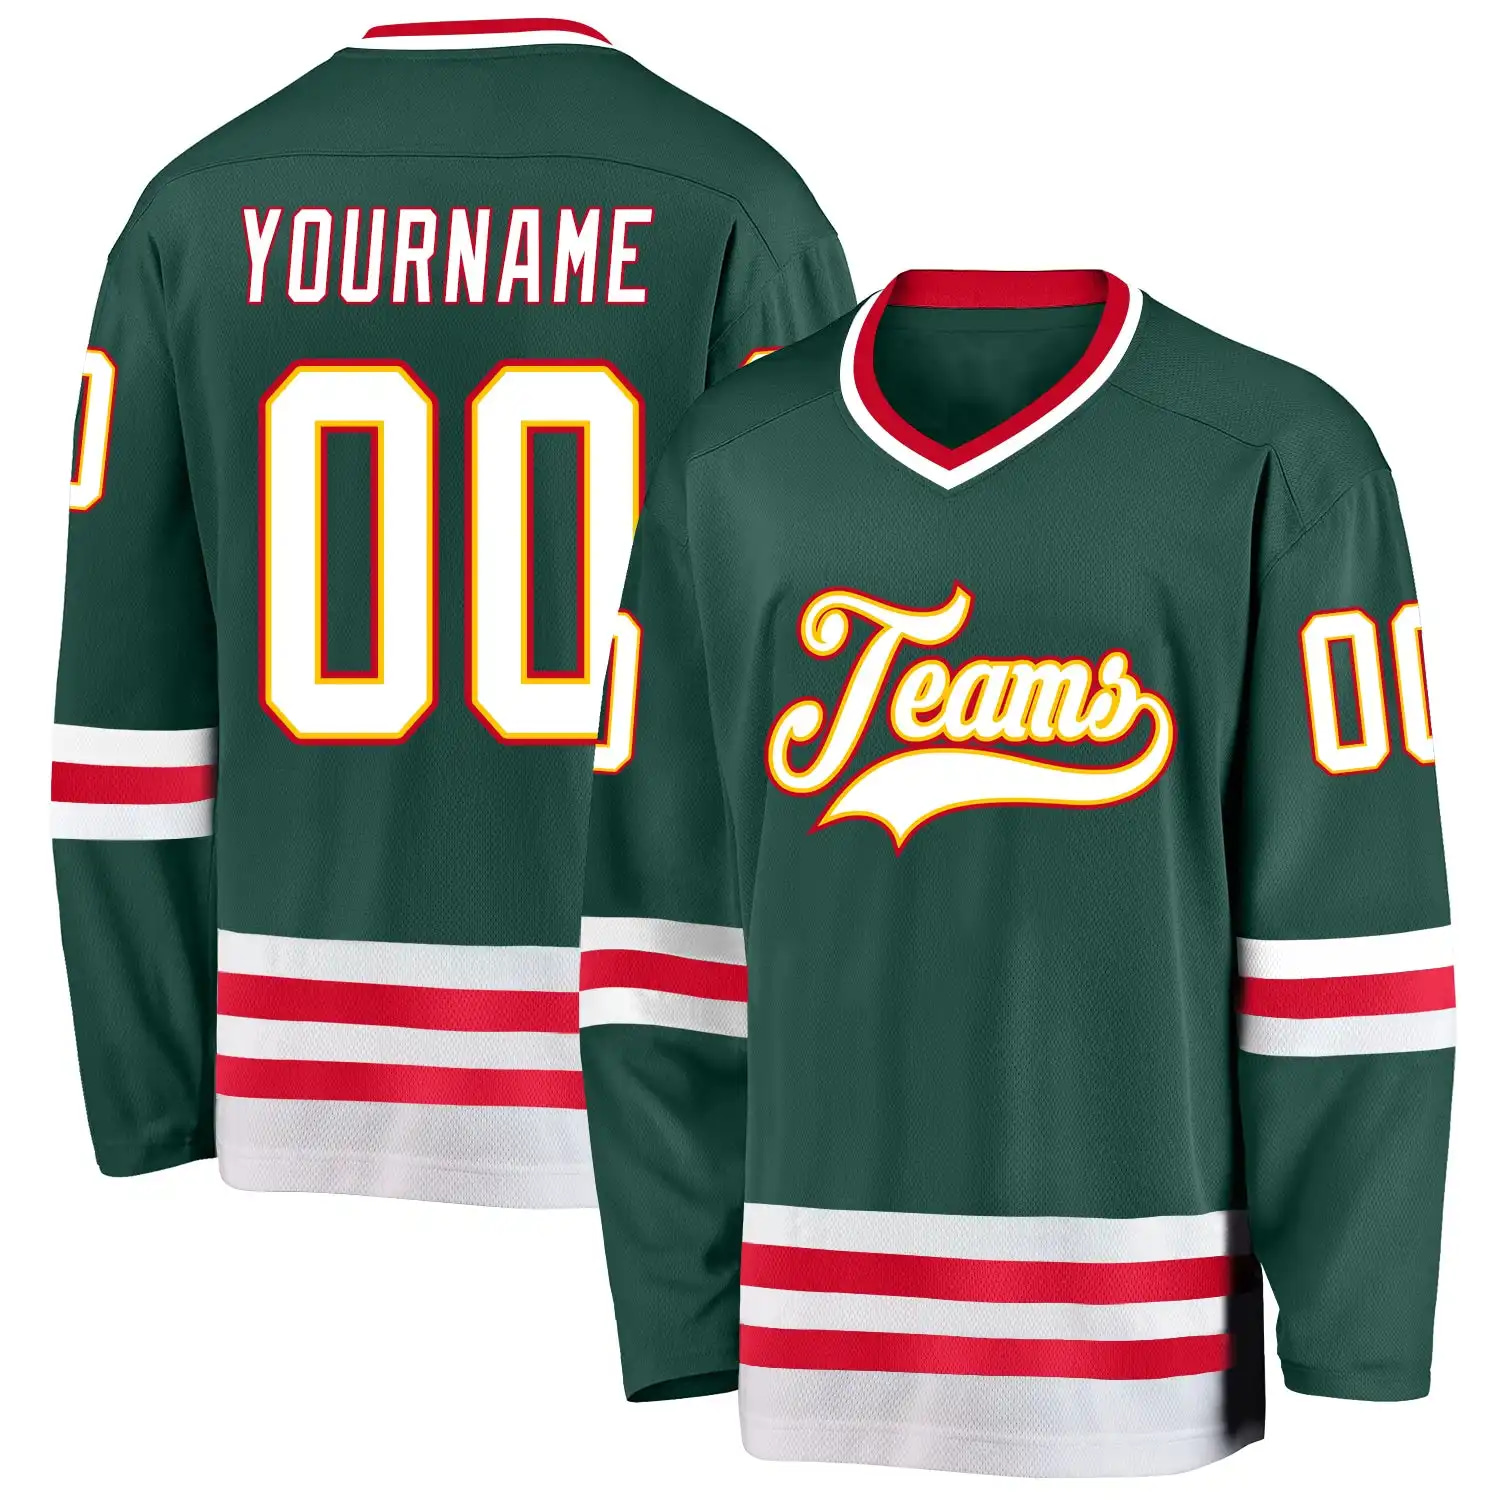 Stitched And Print Green White-Red Hockey Jersey Custom